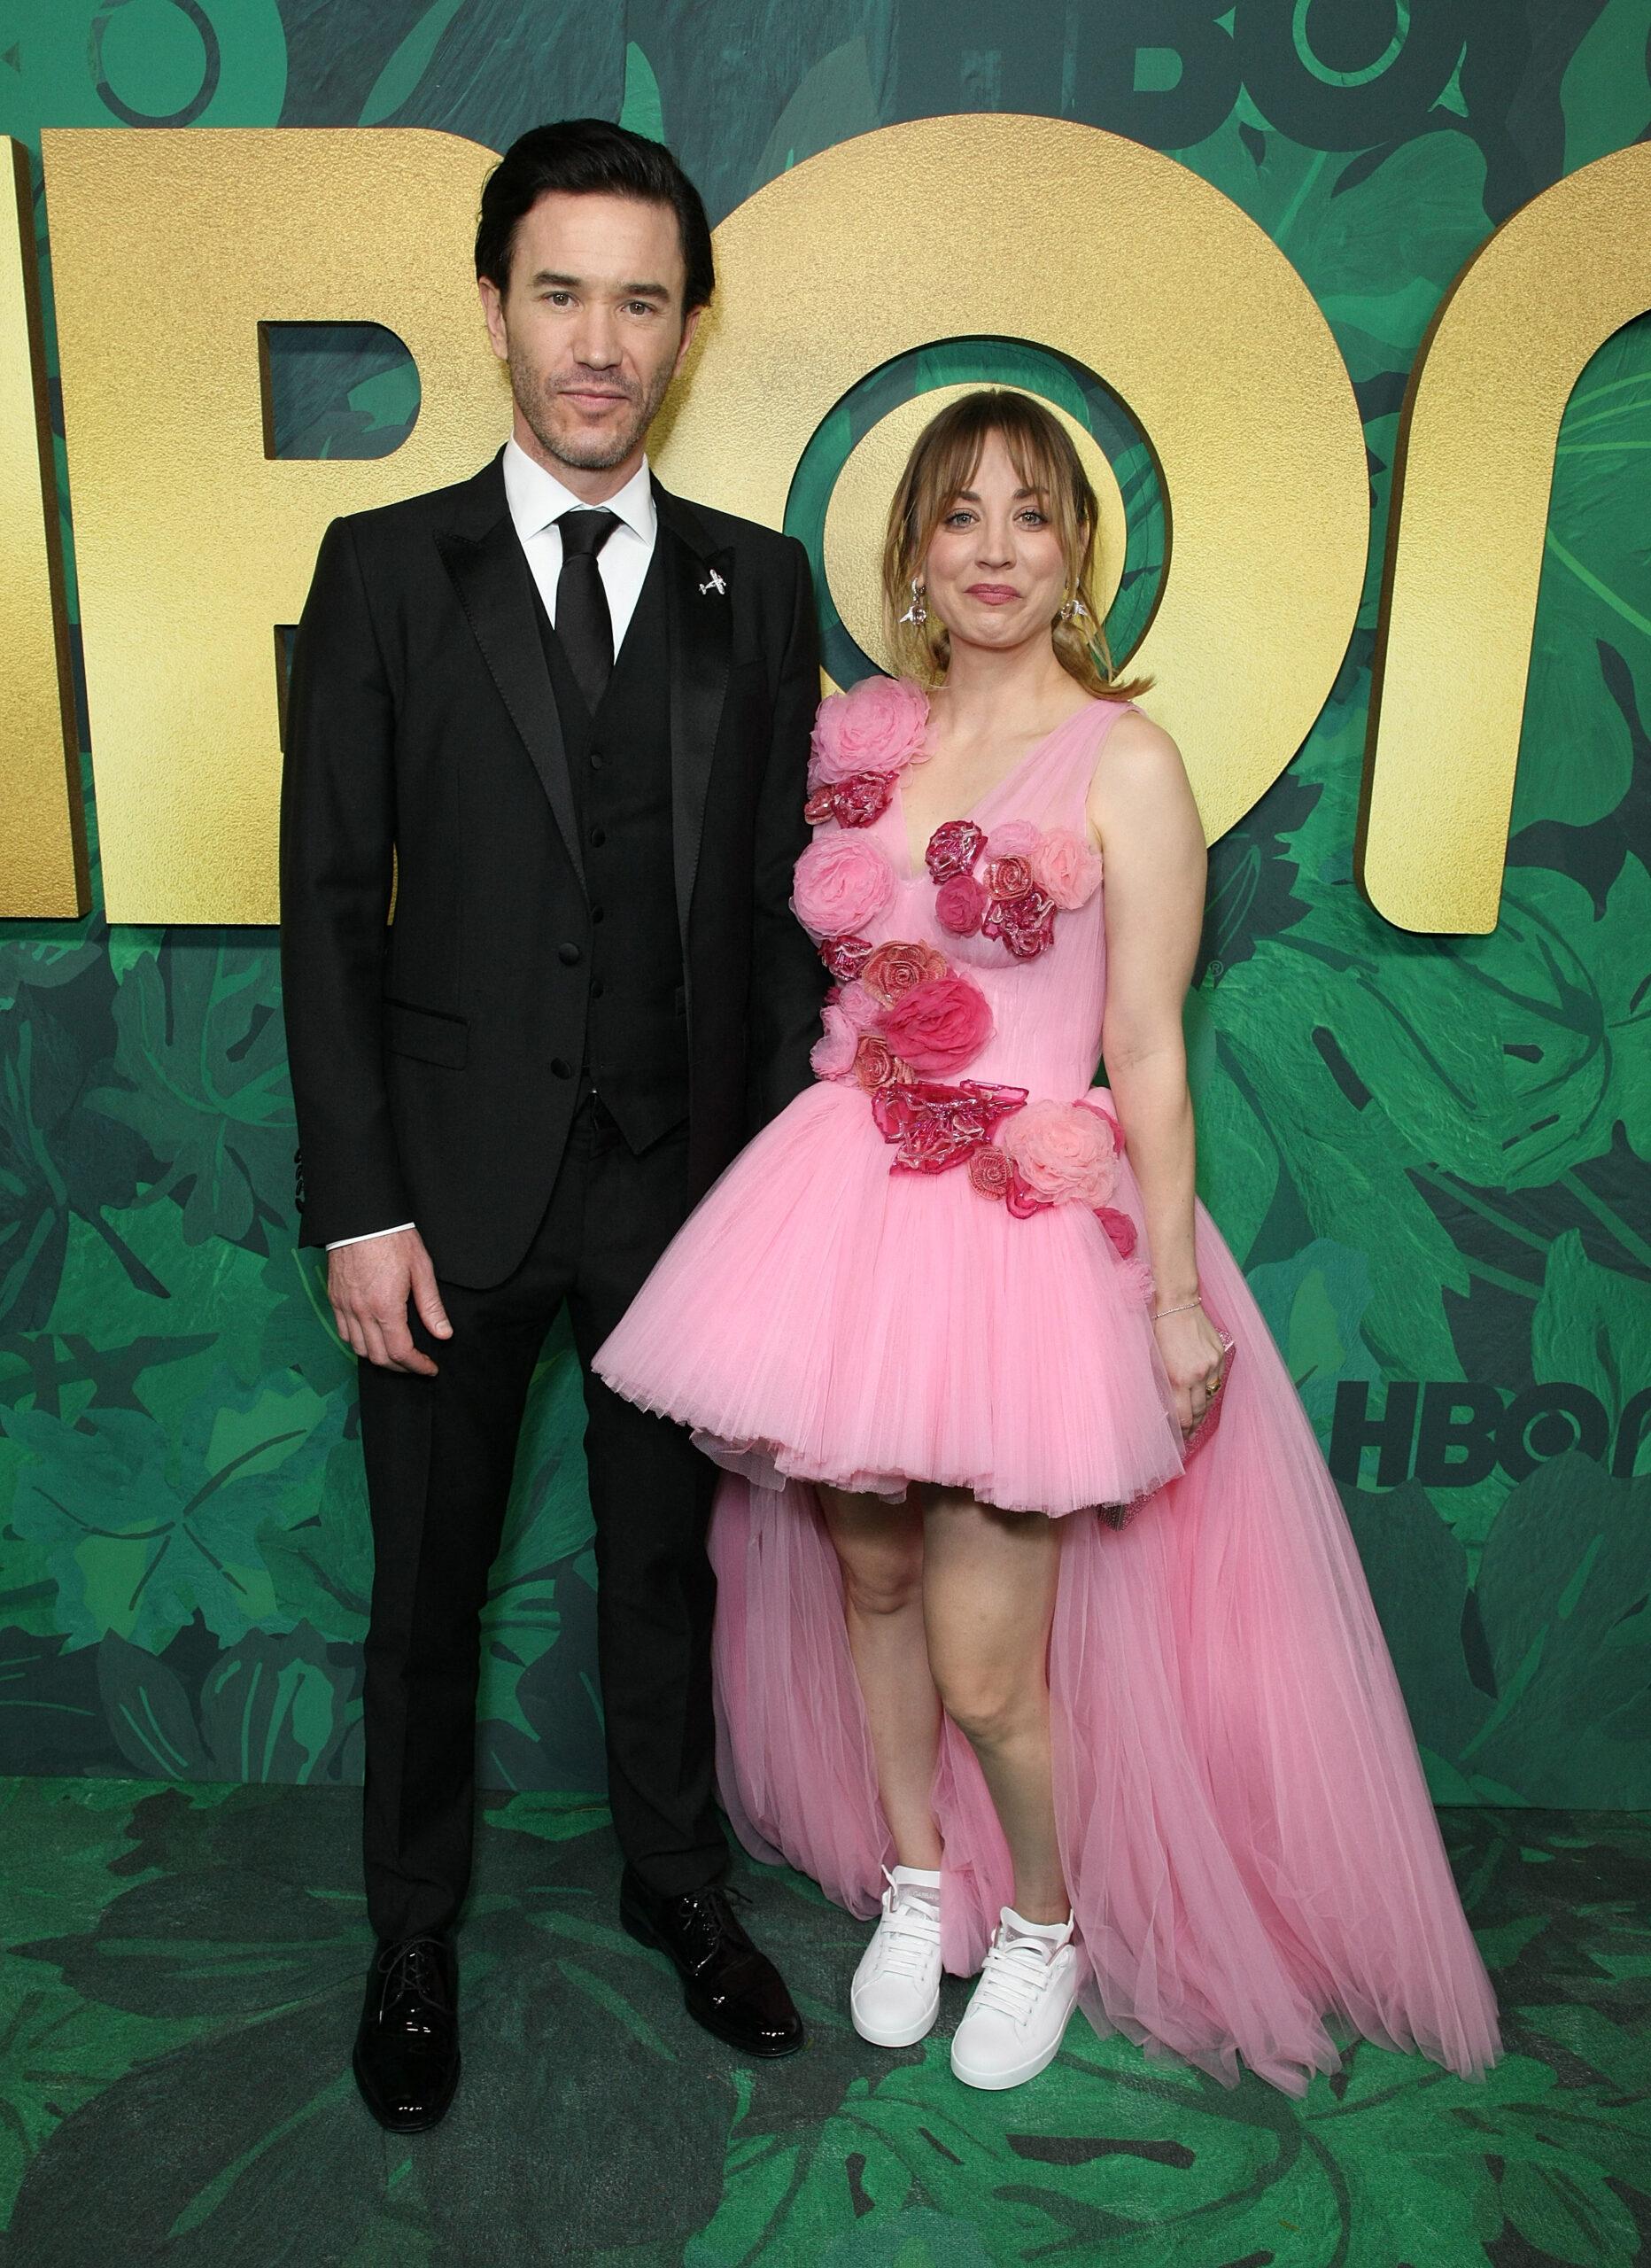 Kaley Cuoco and Tom Pelphrey at HBO and HBO Max Emmy's Party 2022 - Arrivals